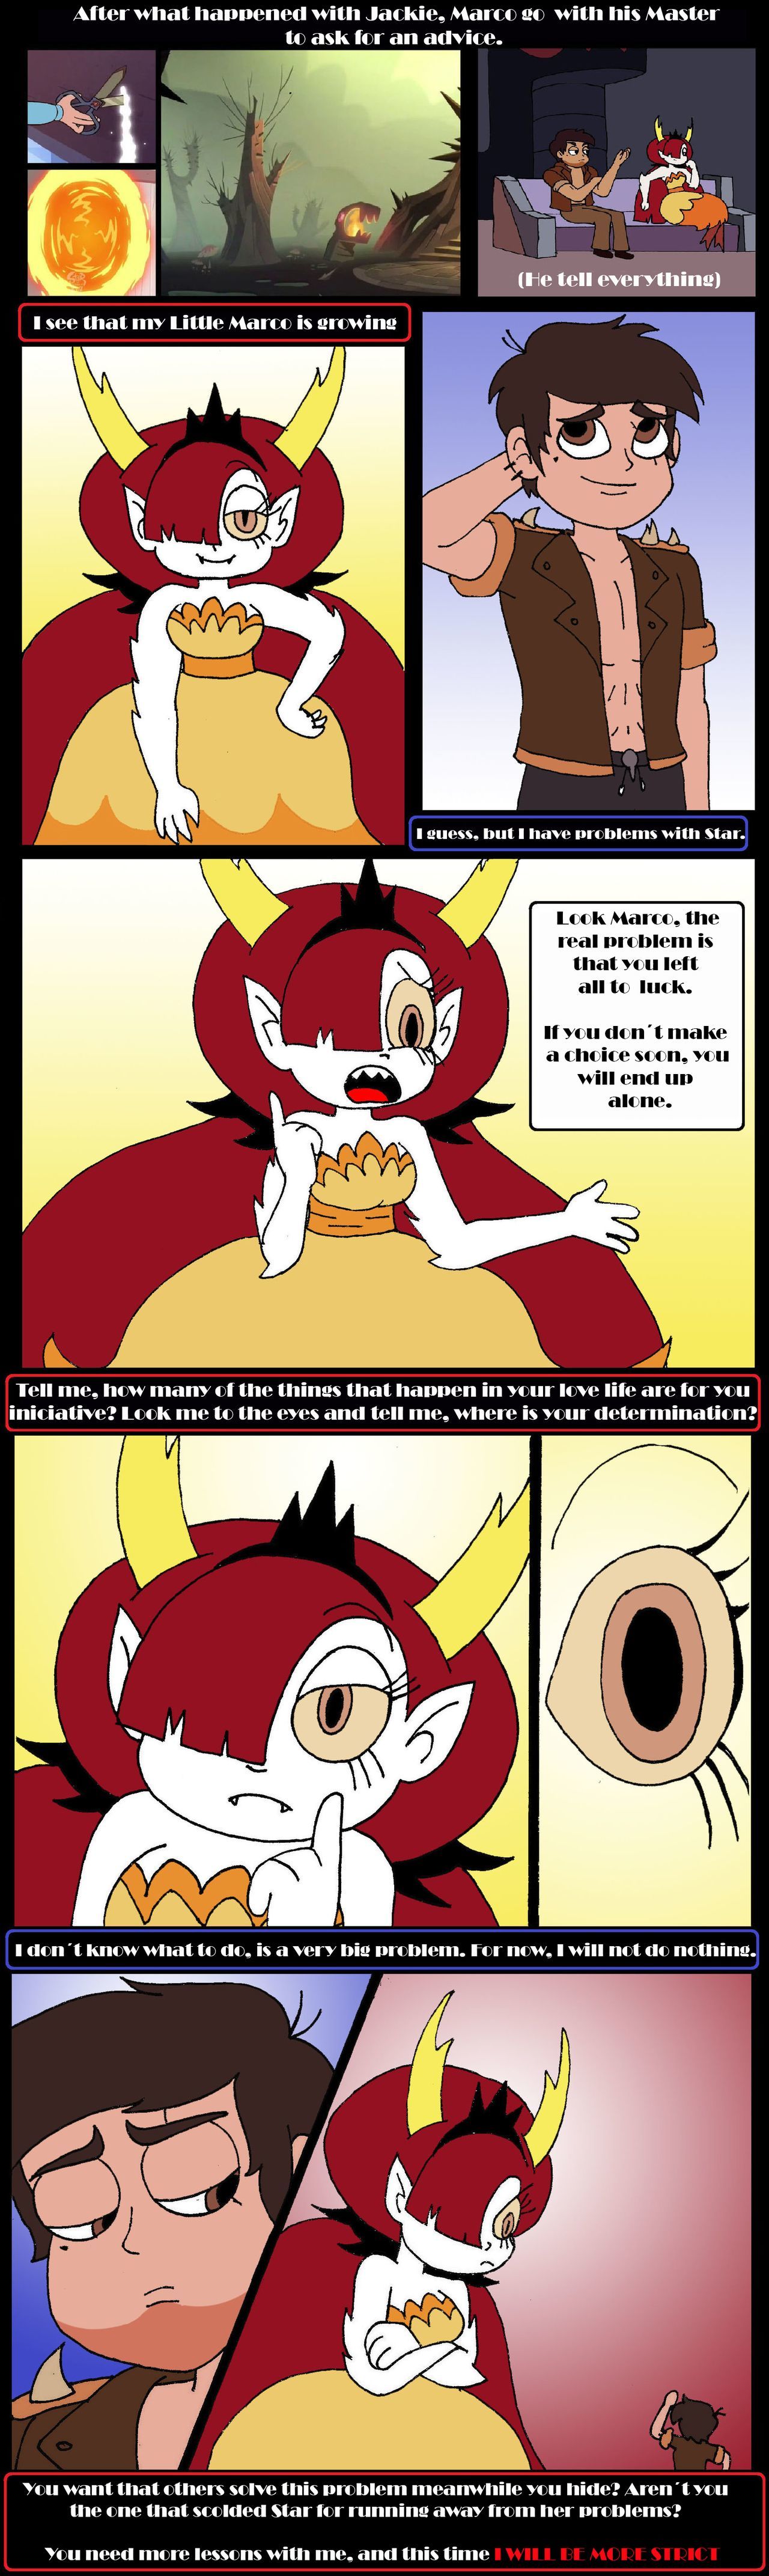 Playing with Fire (Star vs. the Forces of Evil) by Ferozyraptor page 11